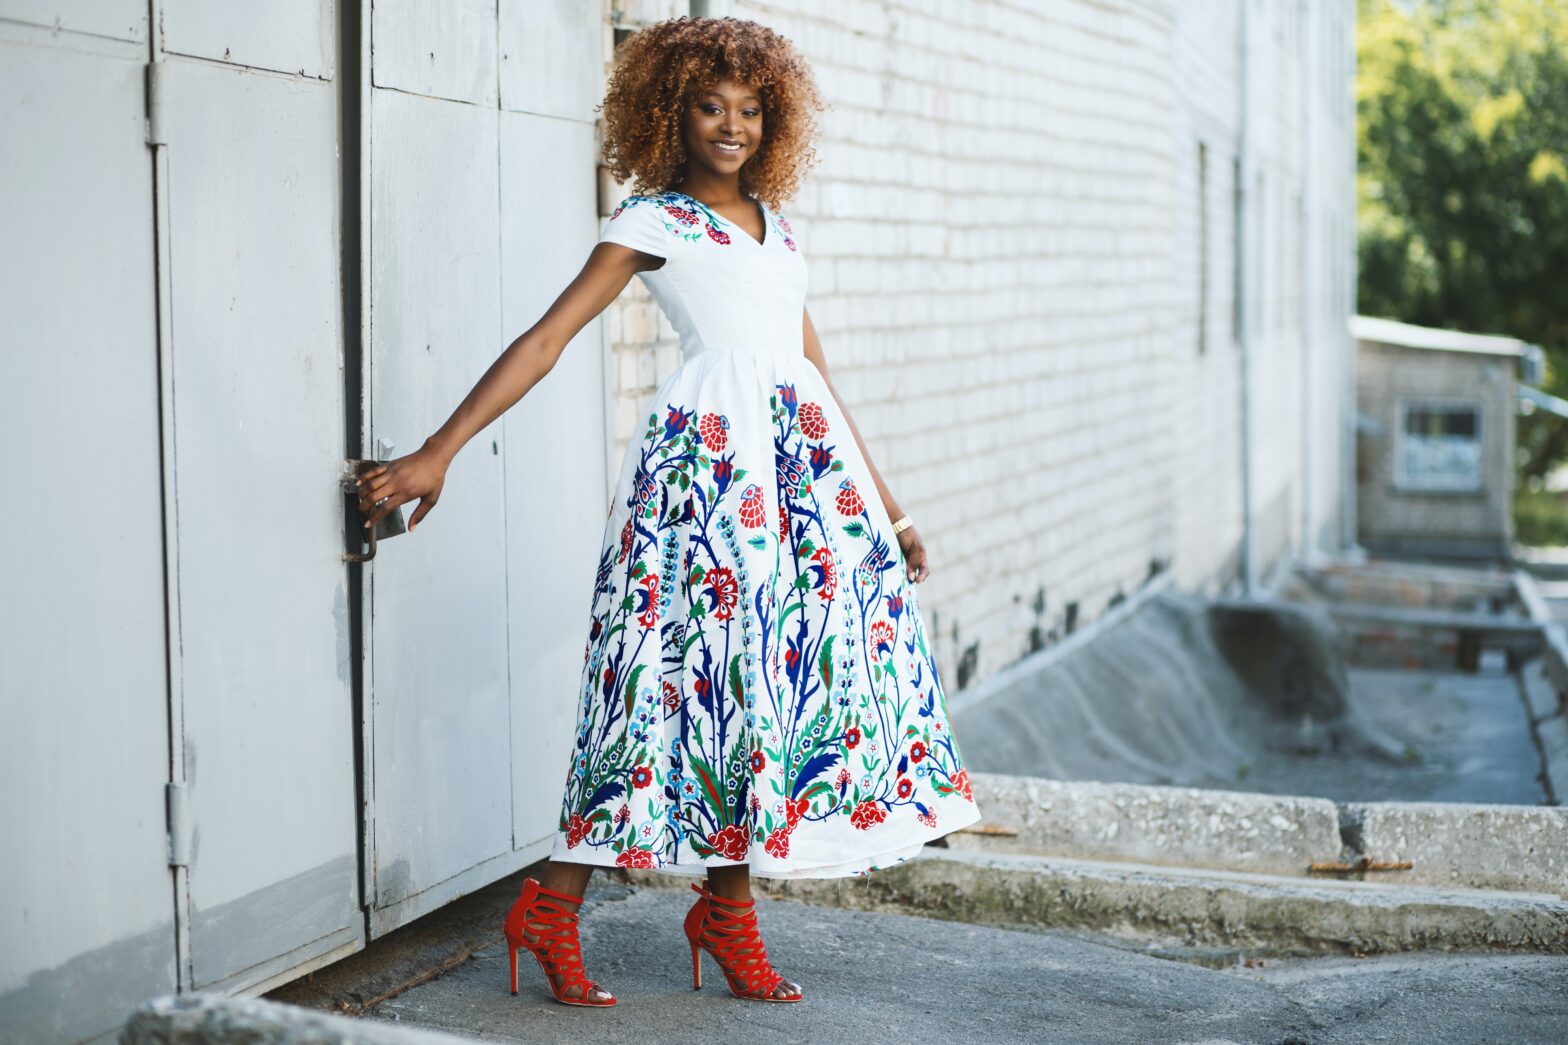 black woman in floral dress and red shoes standing outside